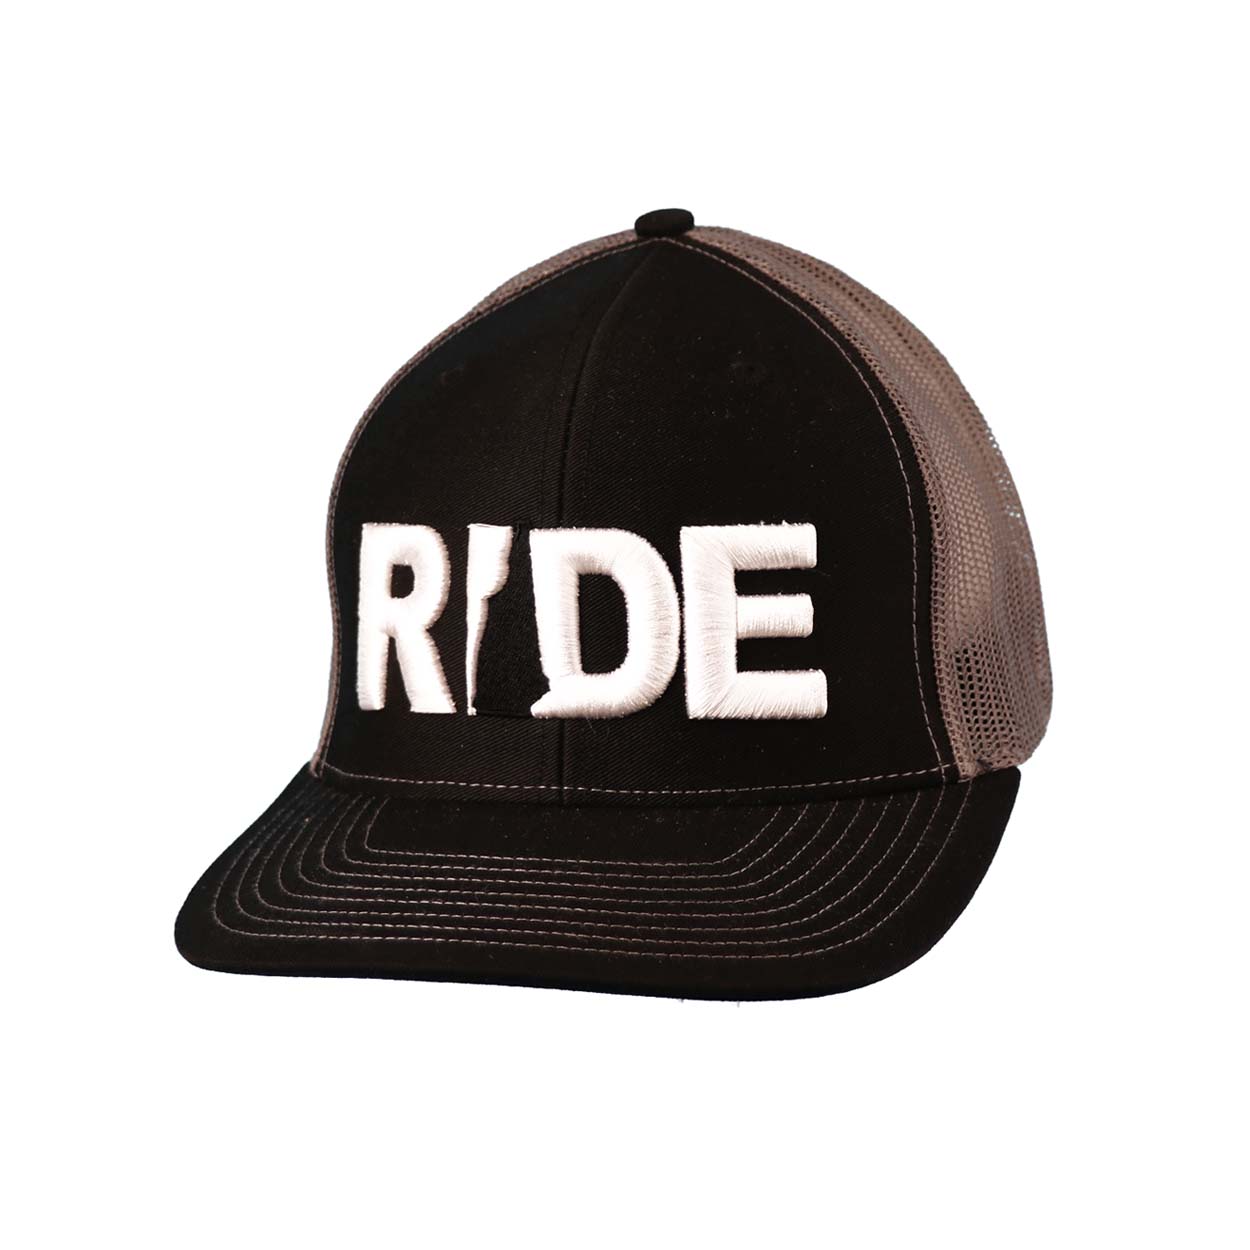 Ride New Hampshire Classic Embroidered Snapback Trucker Hat Black/Charcoal